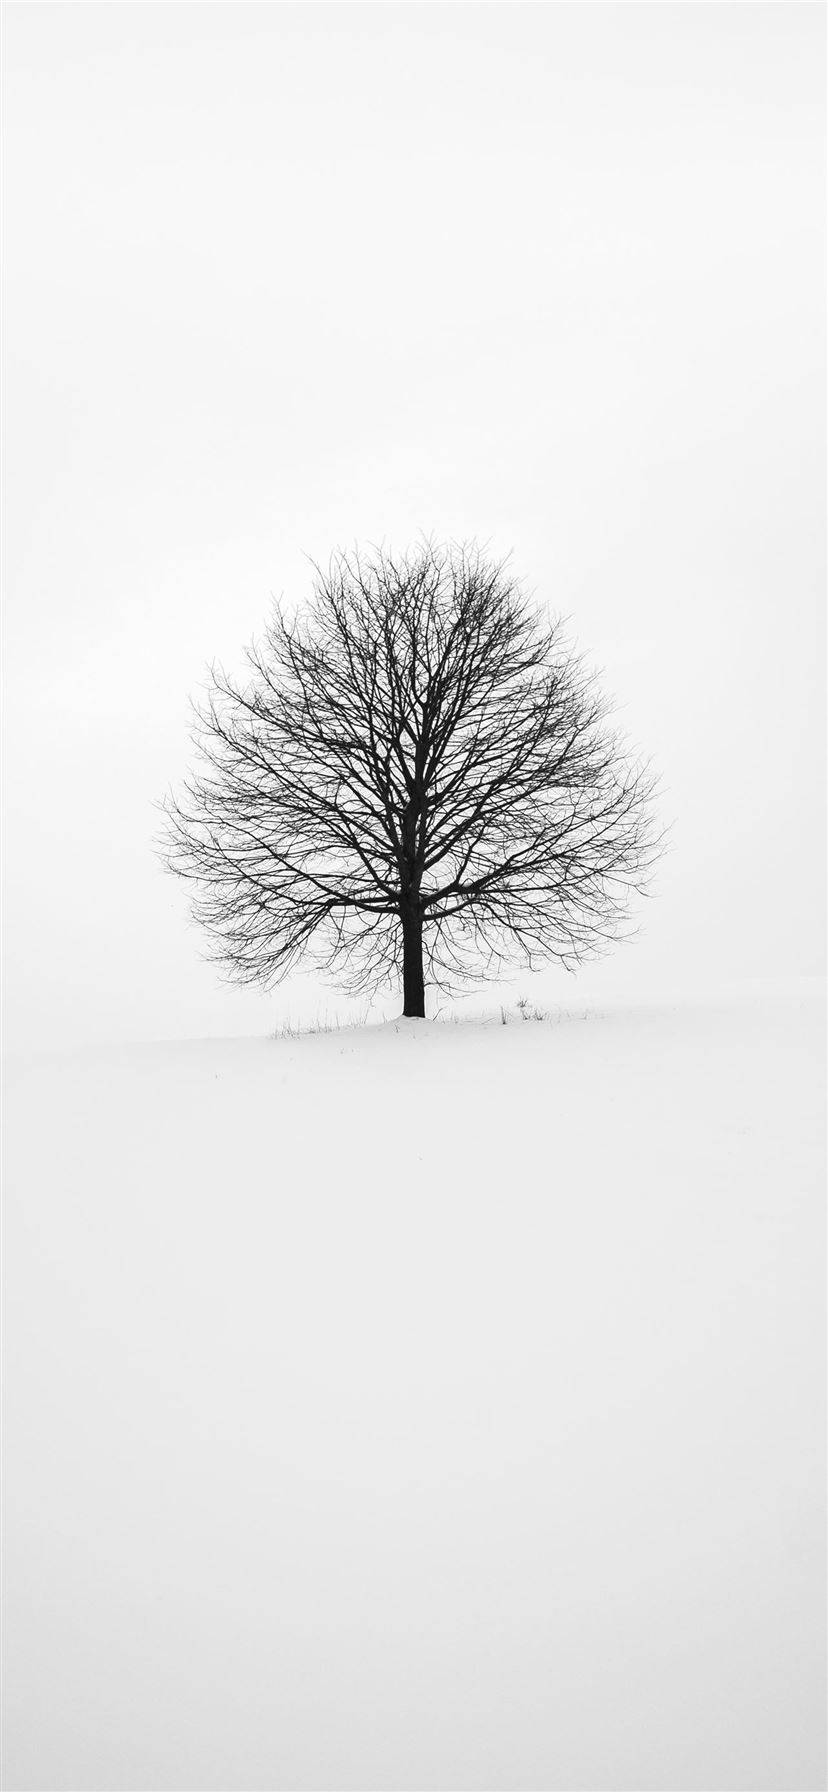 White With Leafless Tree Iphone Background